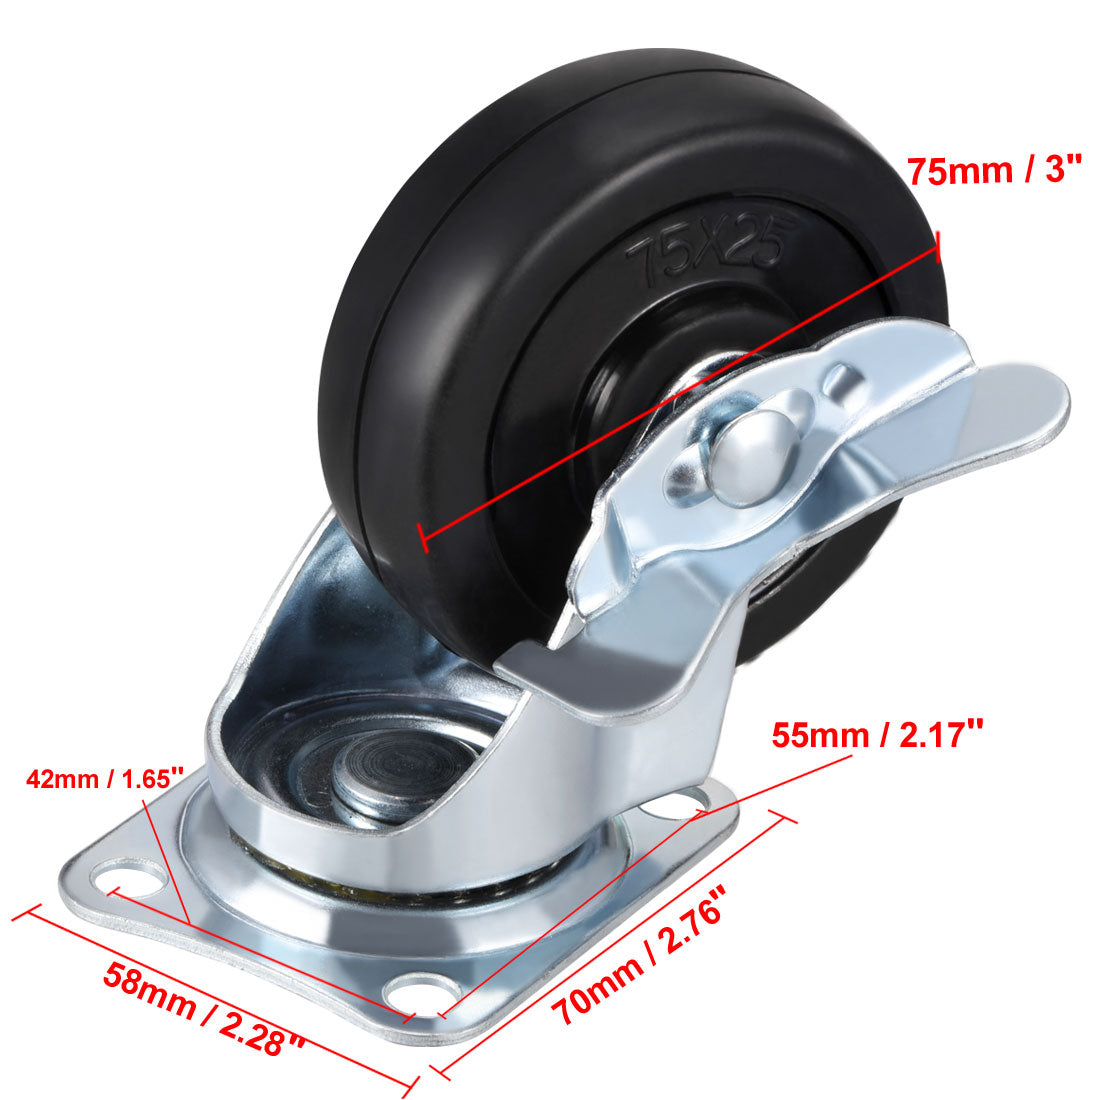 Uxcell Uxcell 3 Inch Swivel Casters Wheels Rubber 360 Degree Top Plate Mounted Caster Wheel with Brake 110lb Capacity 4 Pcs